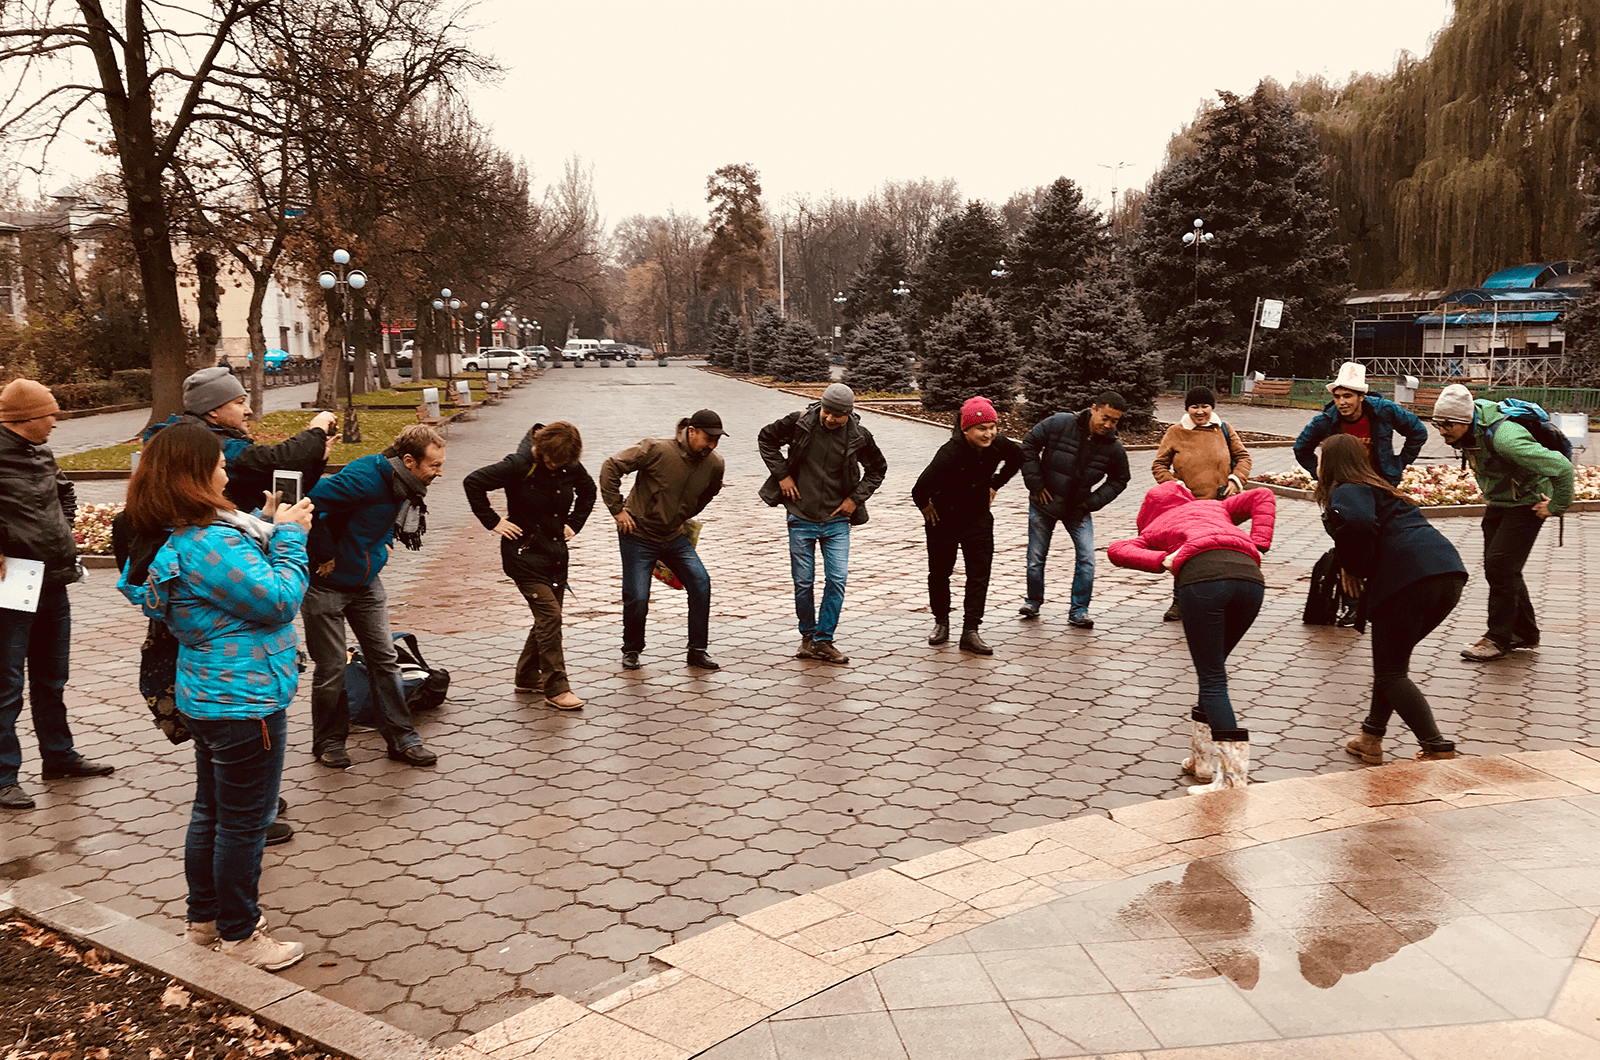 Tour guides and tourists have fun in Bishkek, the capital of the Kyrgyz Republic. Photo by EastguidesWest.